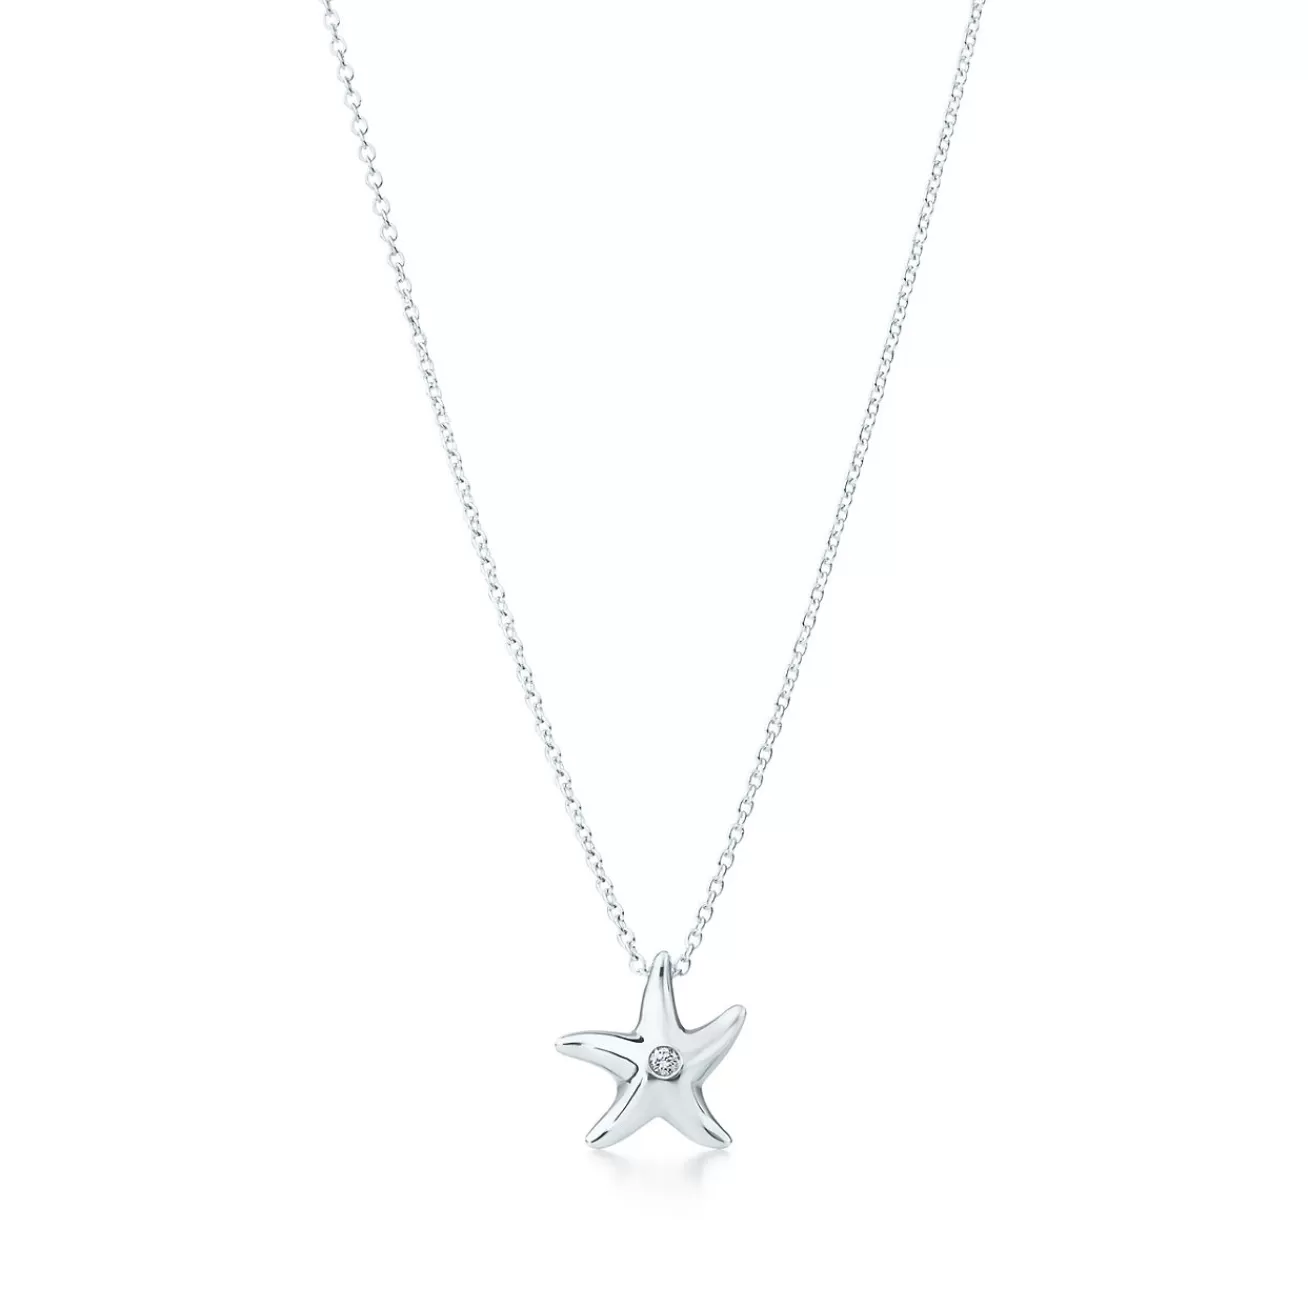 Tiffany & Co. Elsa Peretti® Starfish pendant in sterling silver with a diamond. | ^ Necklaces & Pendants | Sterling Silver Jewelry